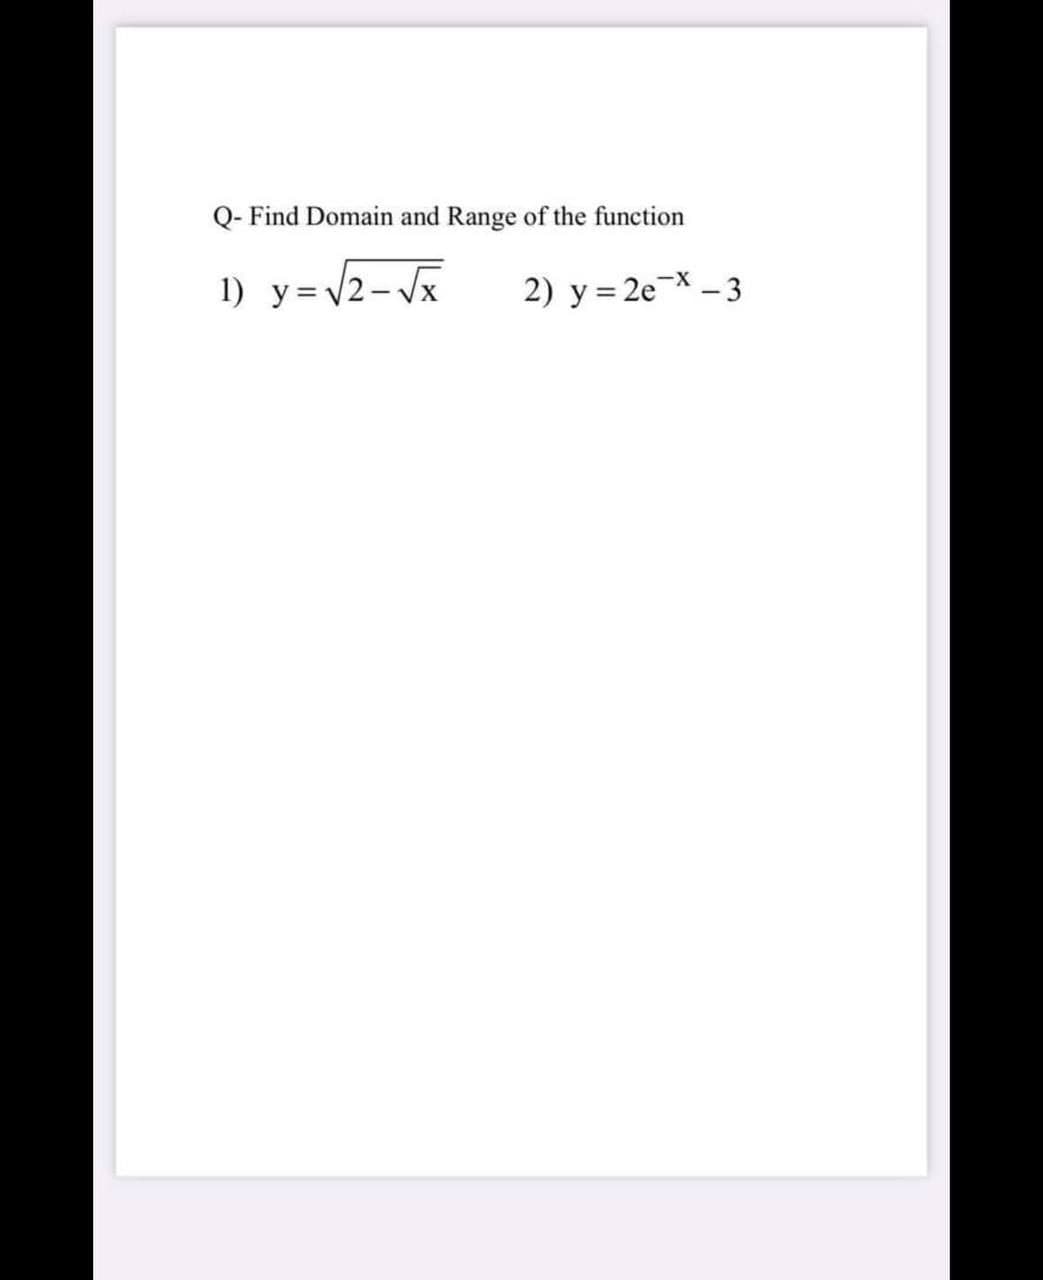 Q- Find Domain and Range of the function
1) y=2- Vx
2) y = 2eX – 3
--
